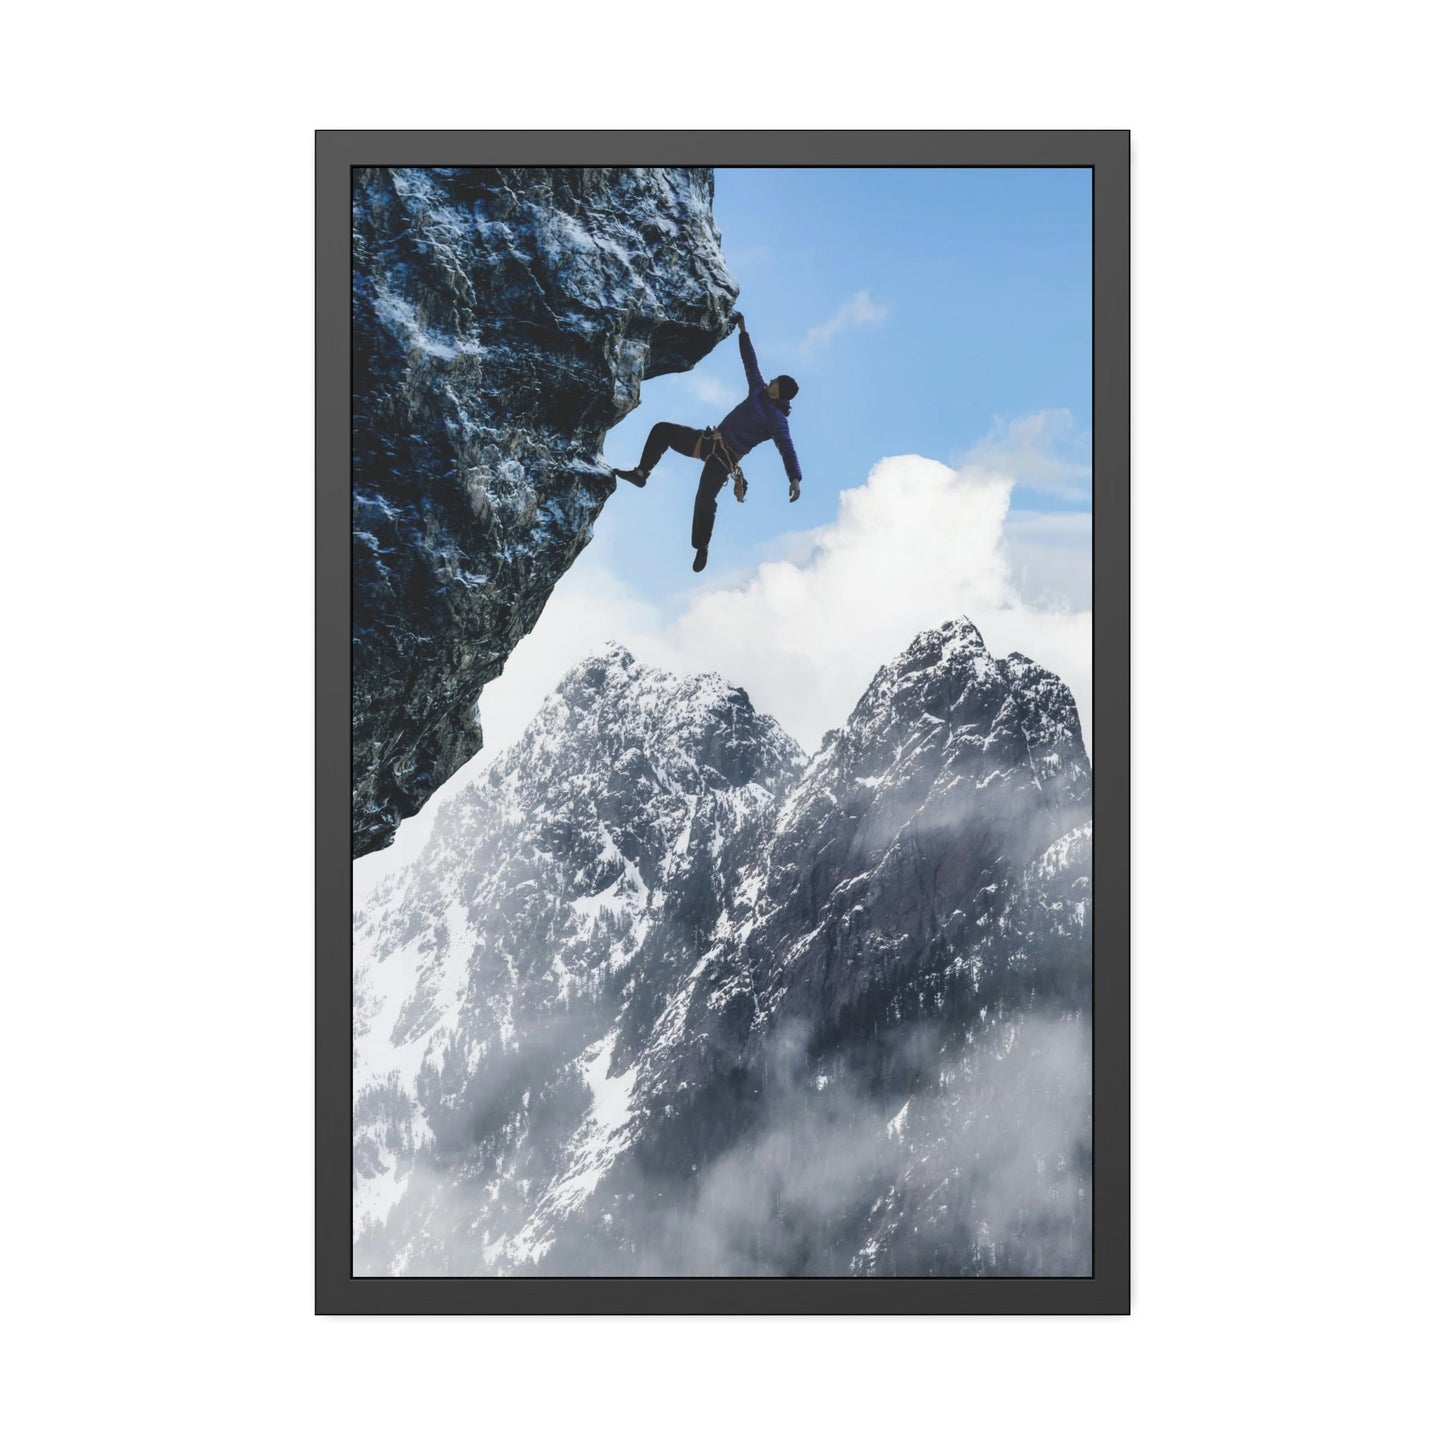 The Art of Adventure: A Thrilling Print on Canvas for Your Home Decor